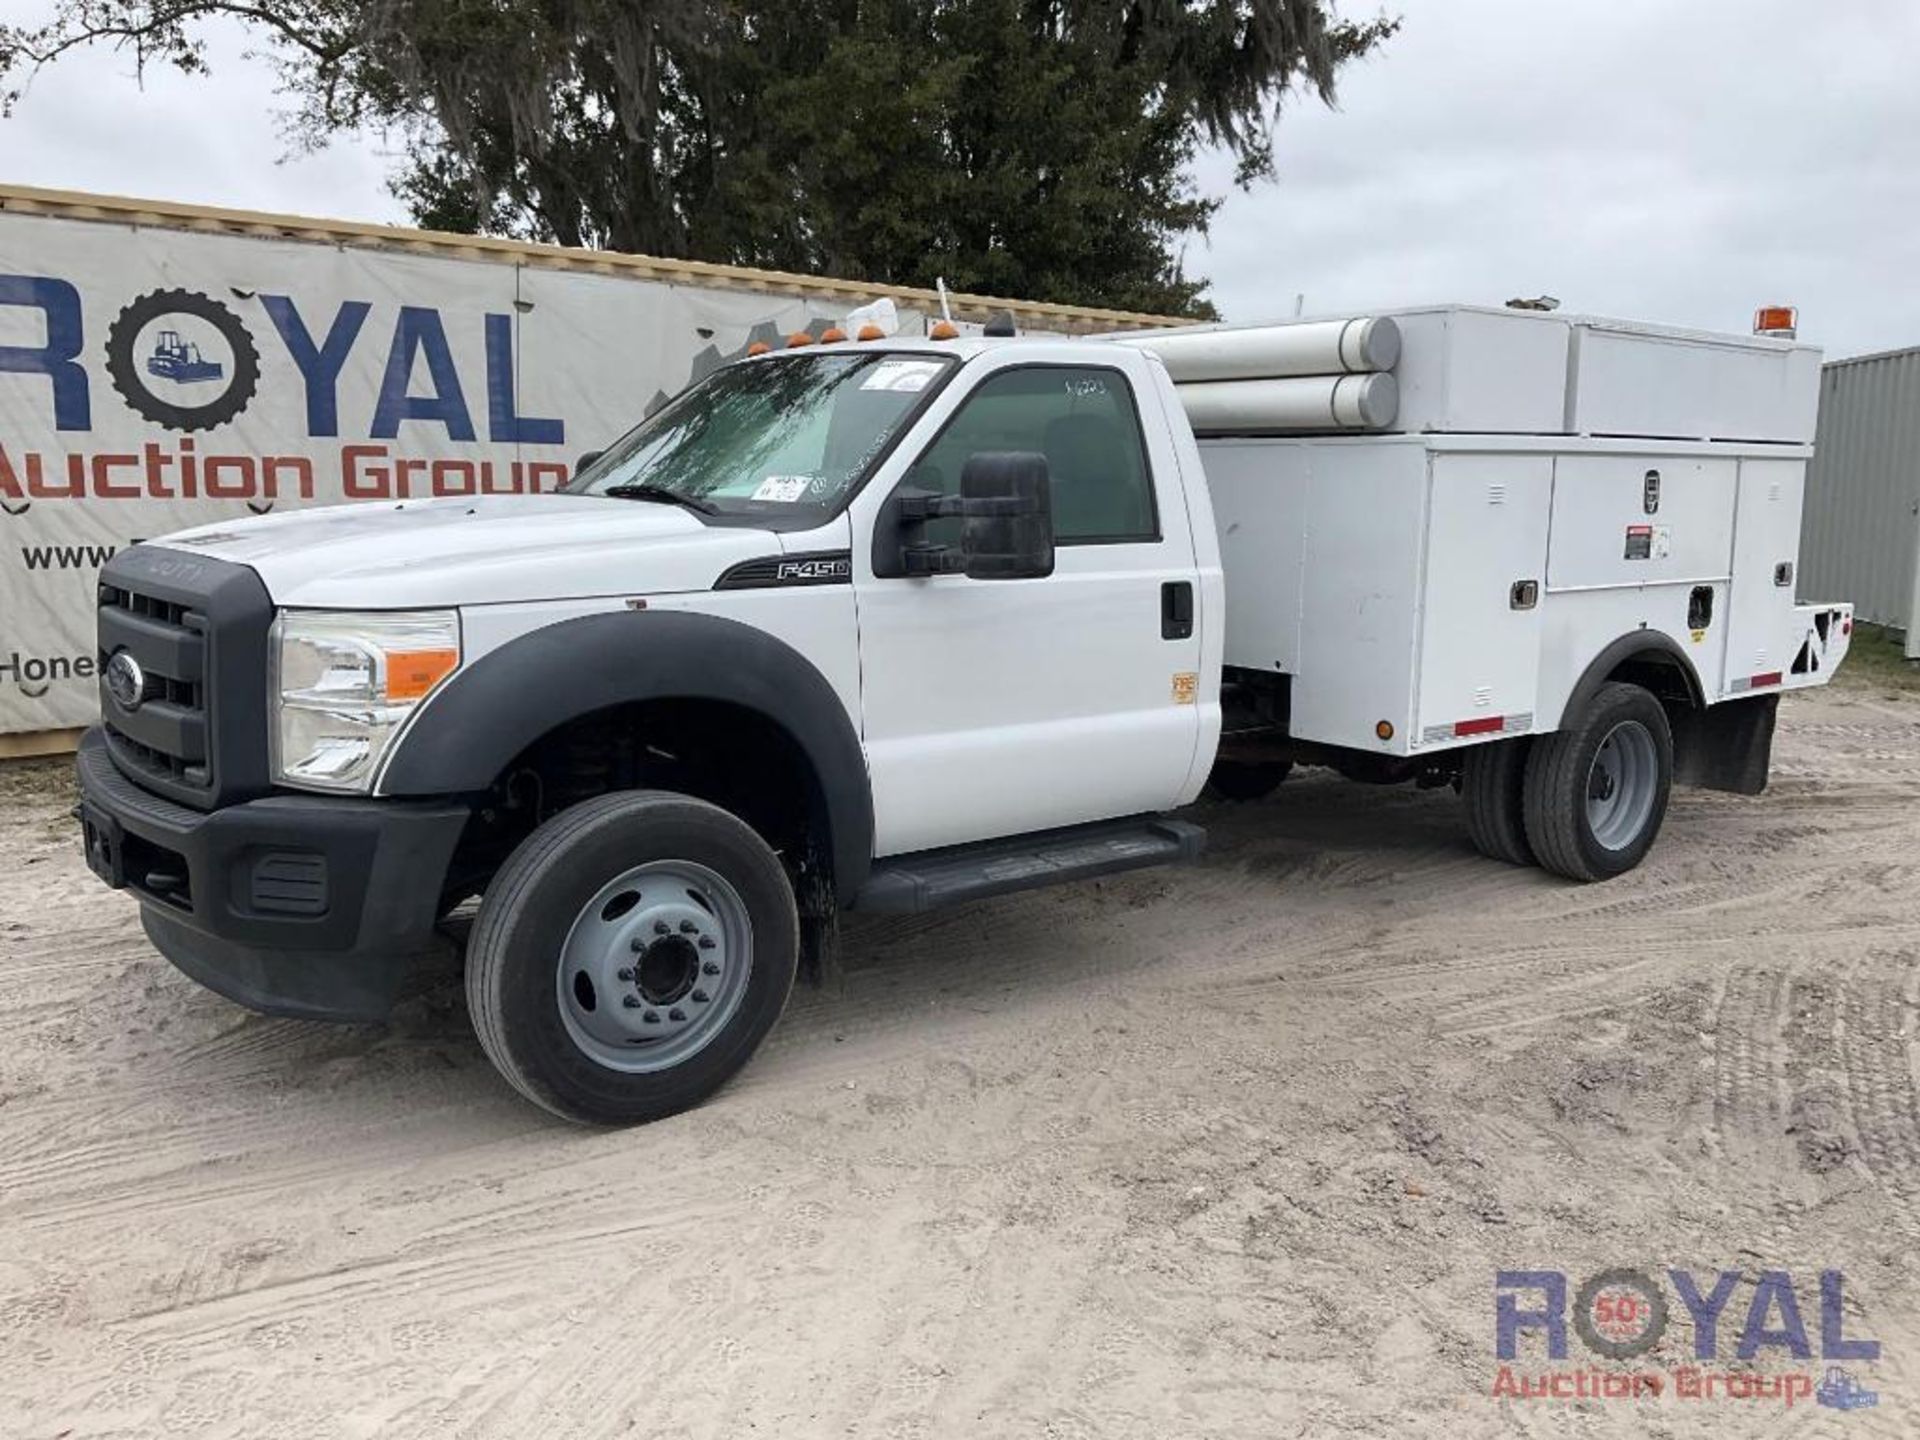 2012 Ford F450 Service Truck